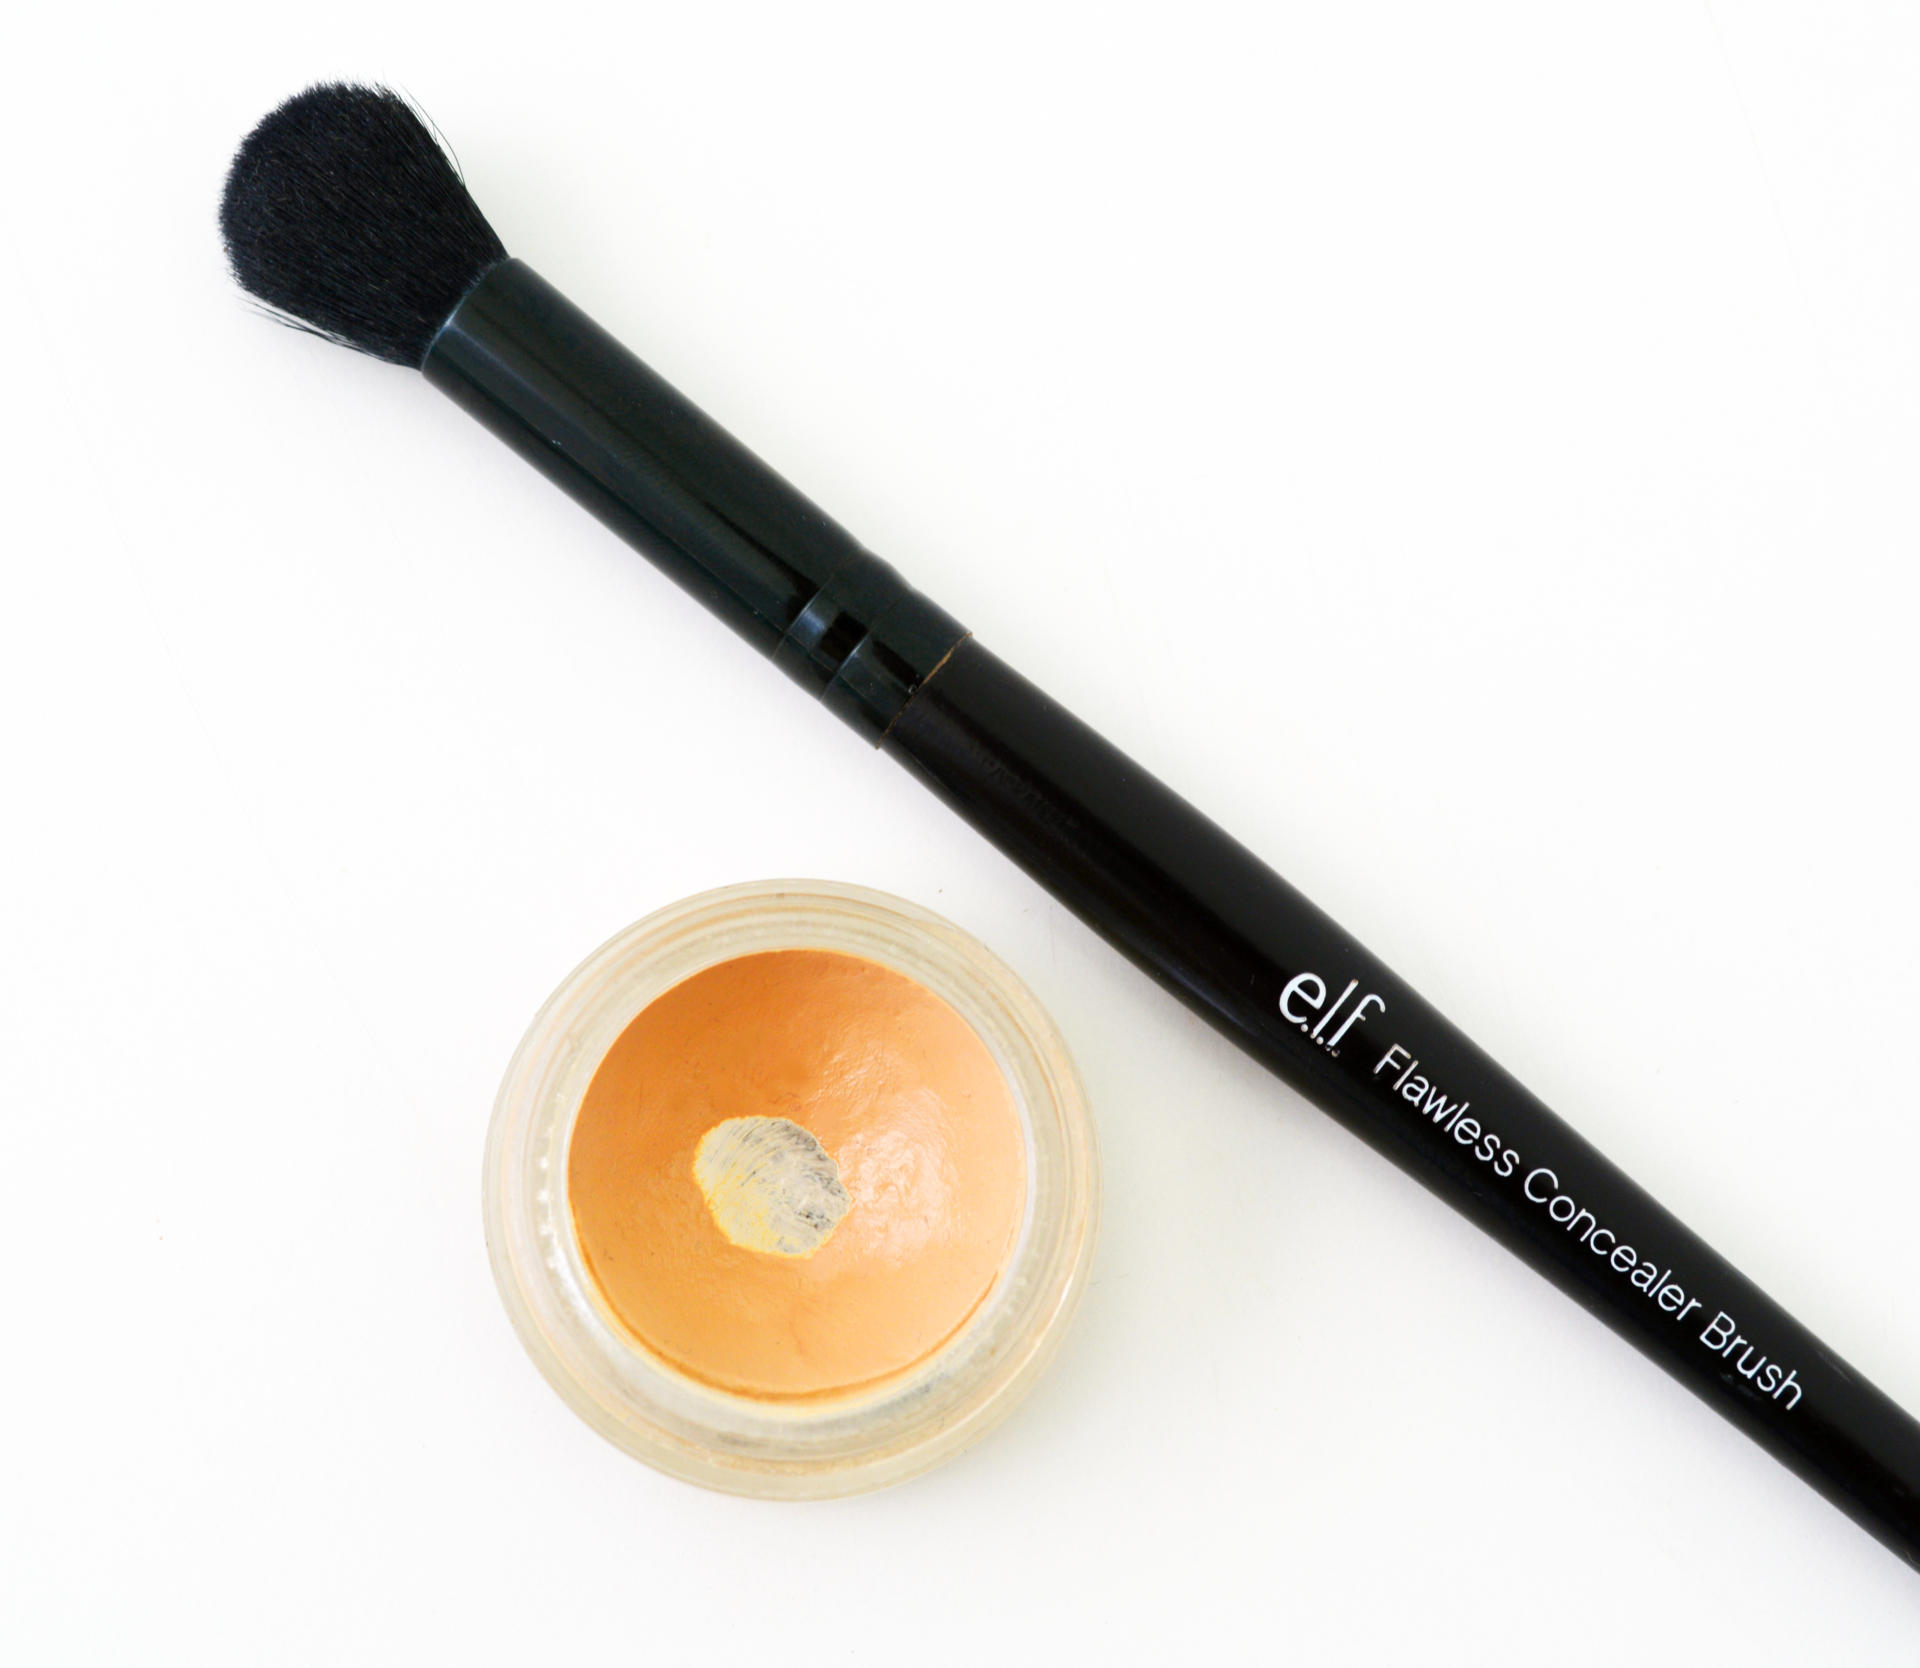 The e.l.f. Studio Flawless Concealer Brush